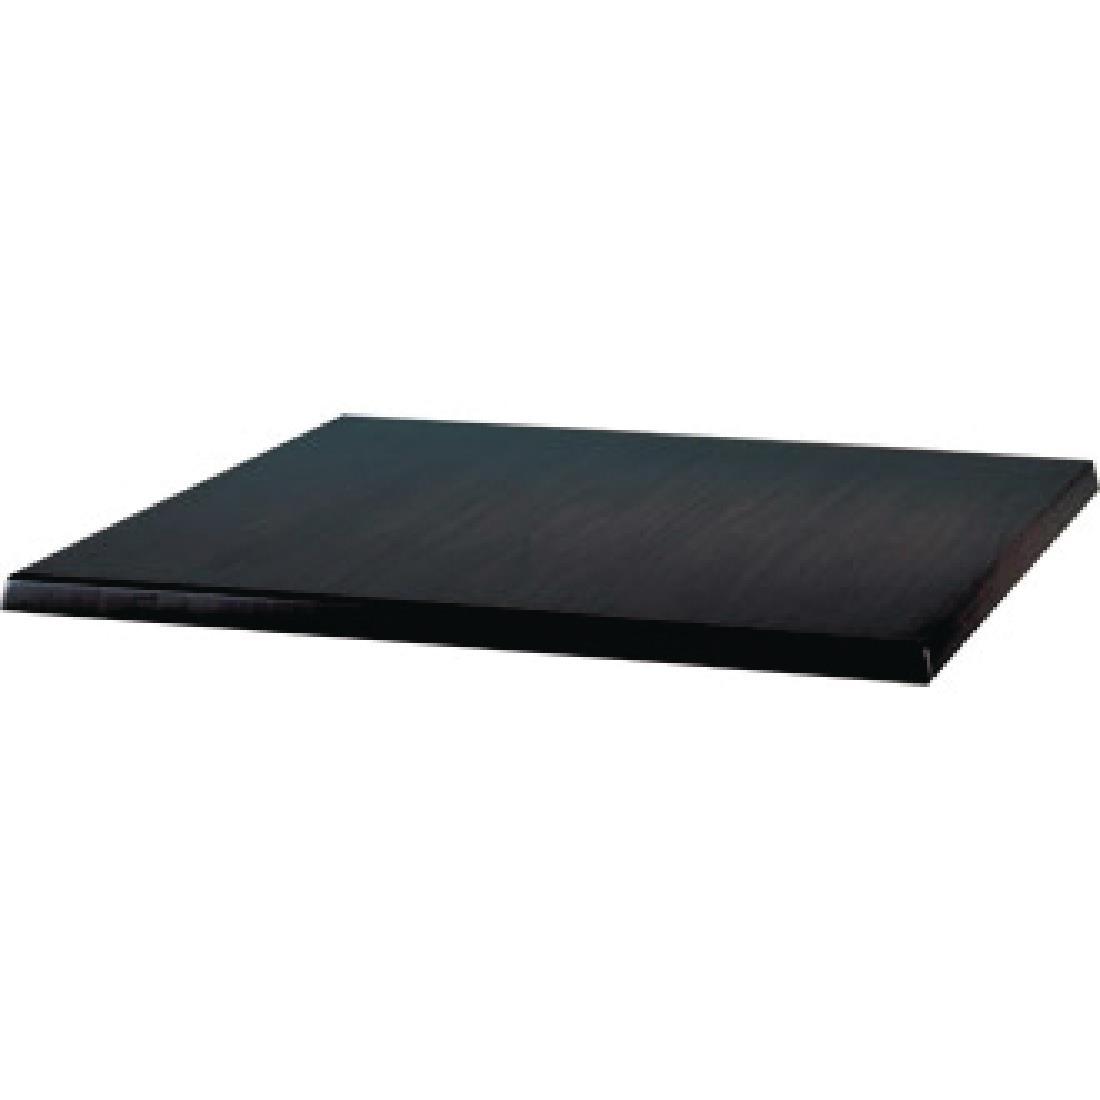 Werzalit Pre-Drilled Square Table Top Black 600mm